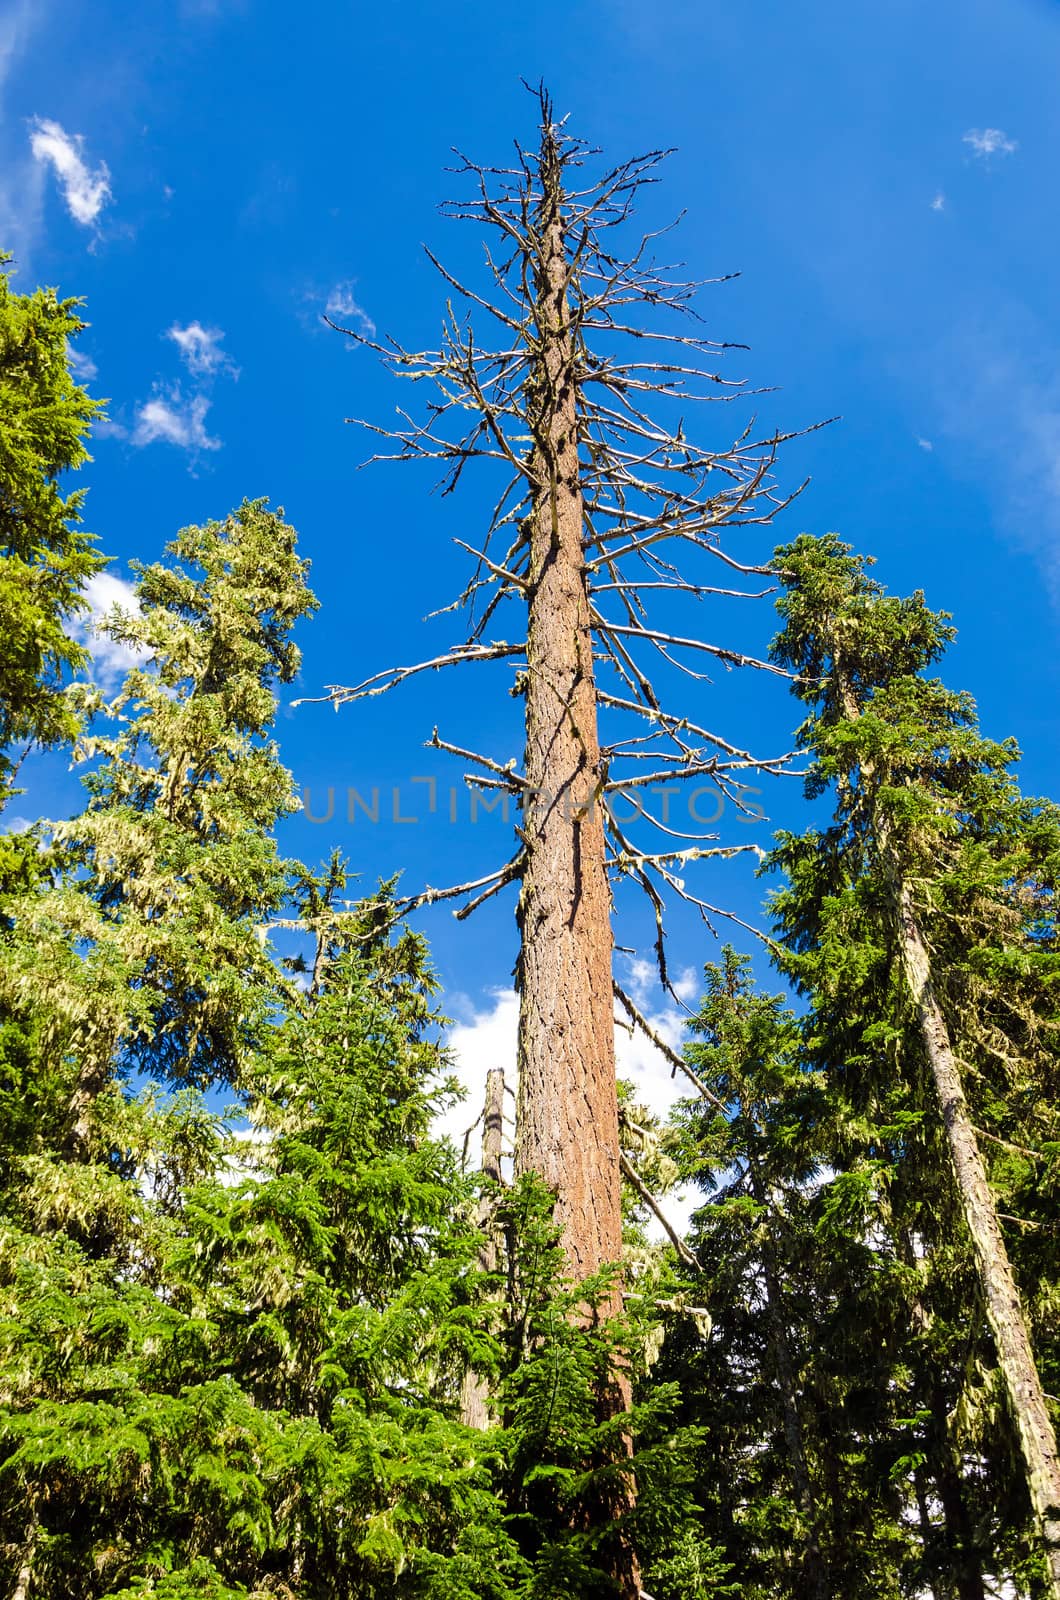 Dead pine tree rising high above living pine trees in Mt. Hood National Forest